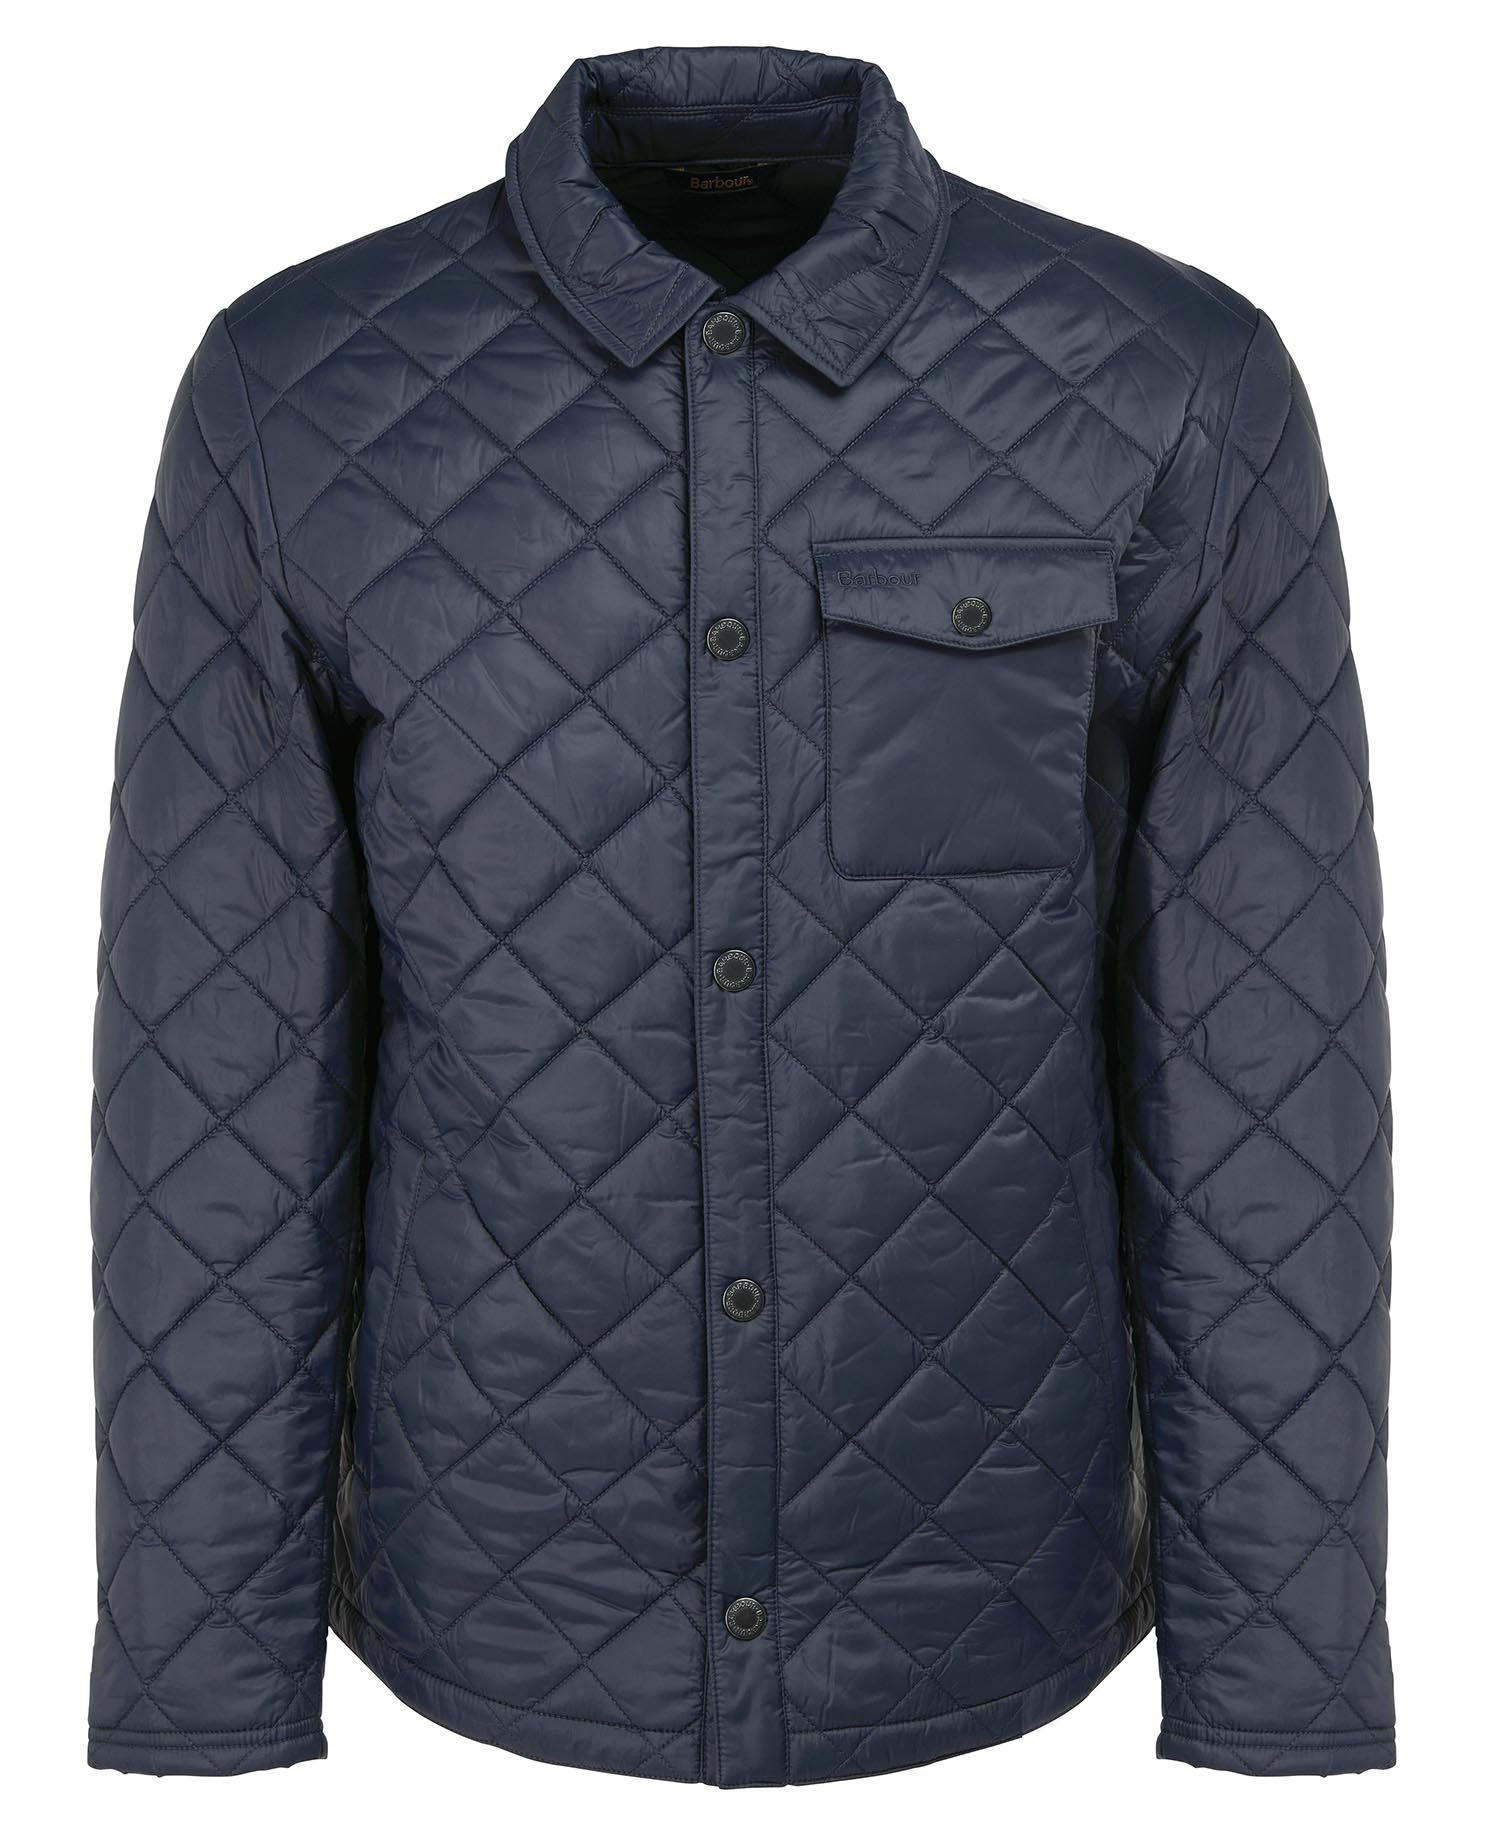 Barbour Newbie Quilted Jacket